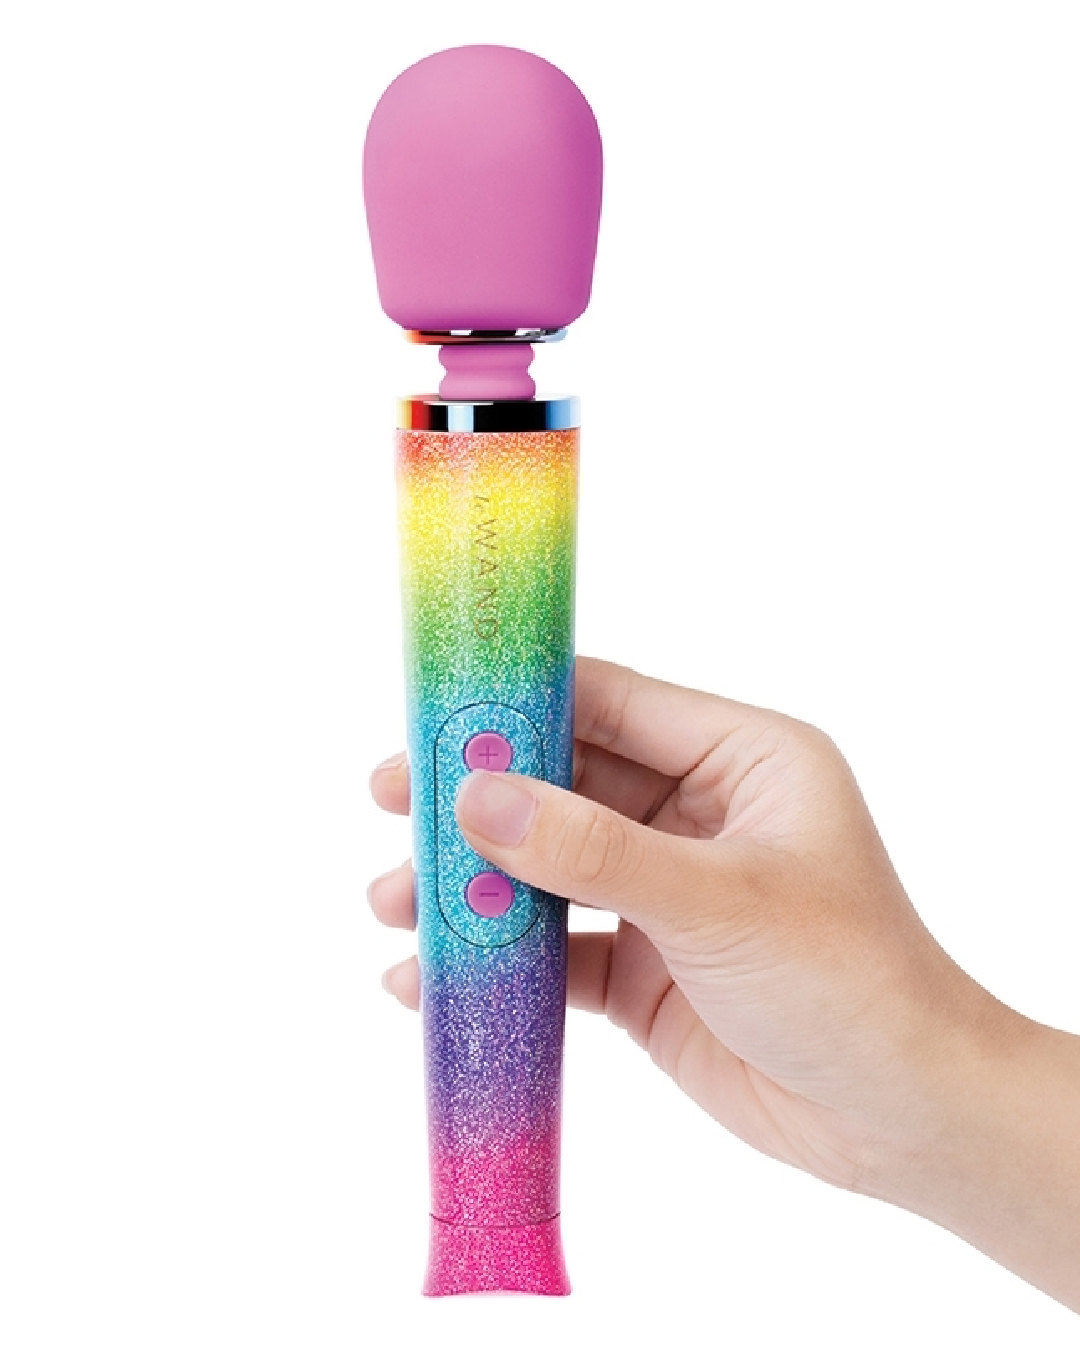 All That Glimmers Wand Vibrator Set - Rainbow in hand 